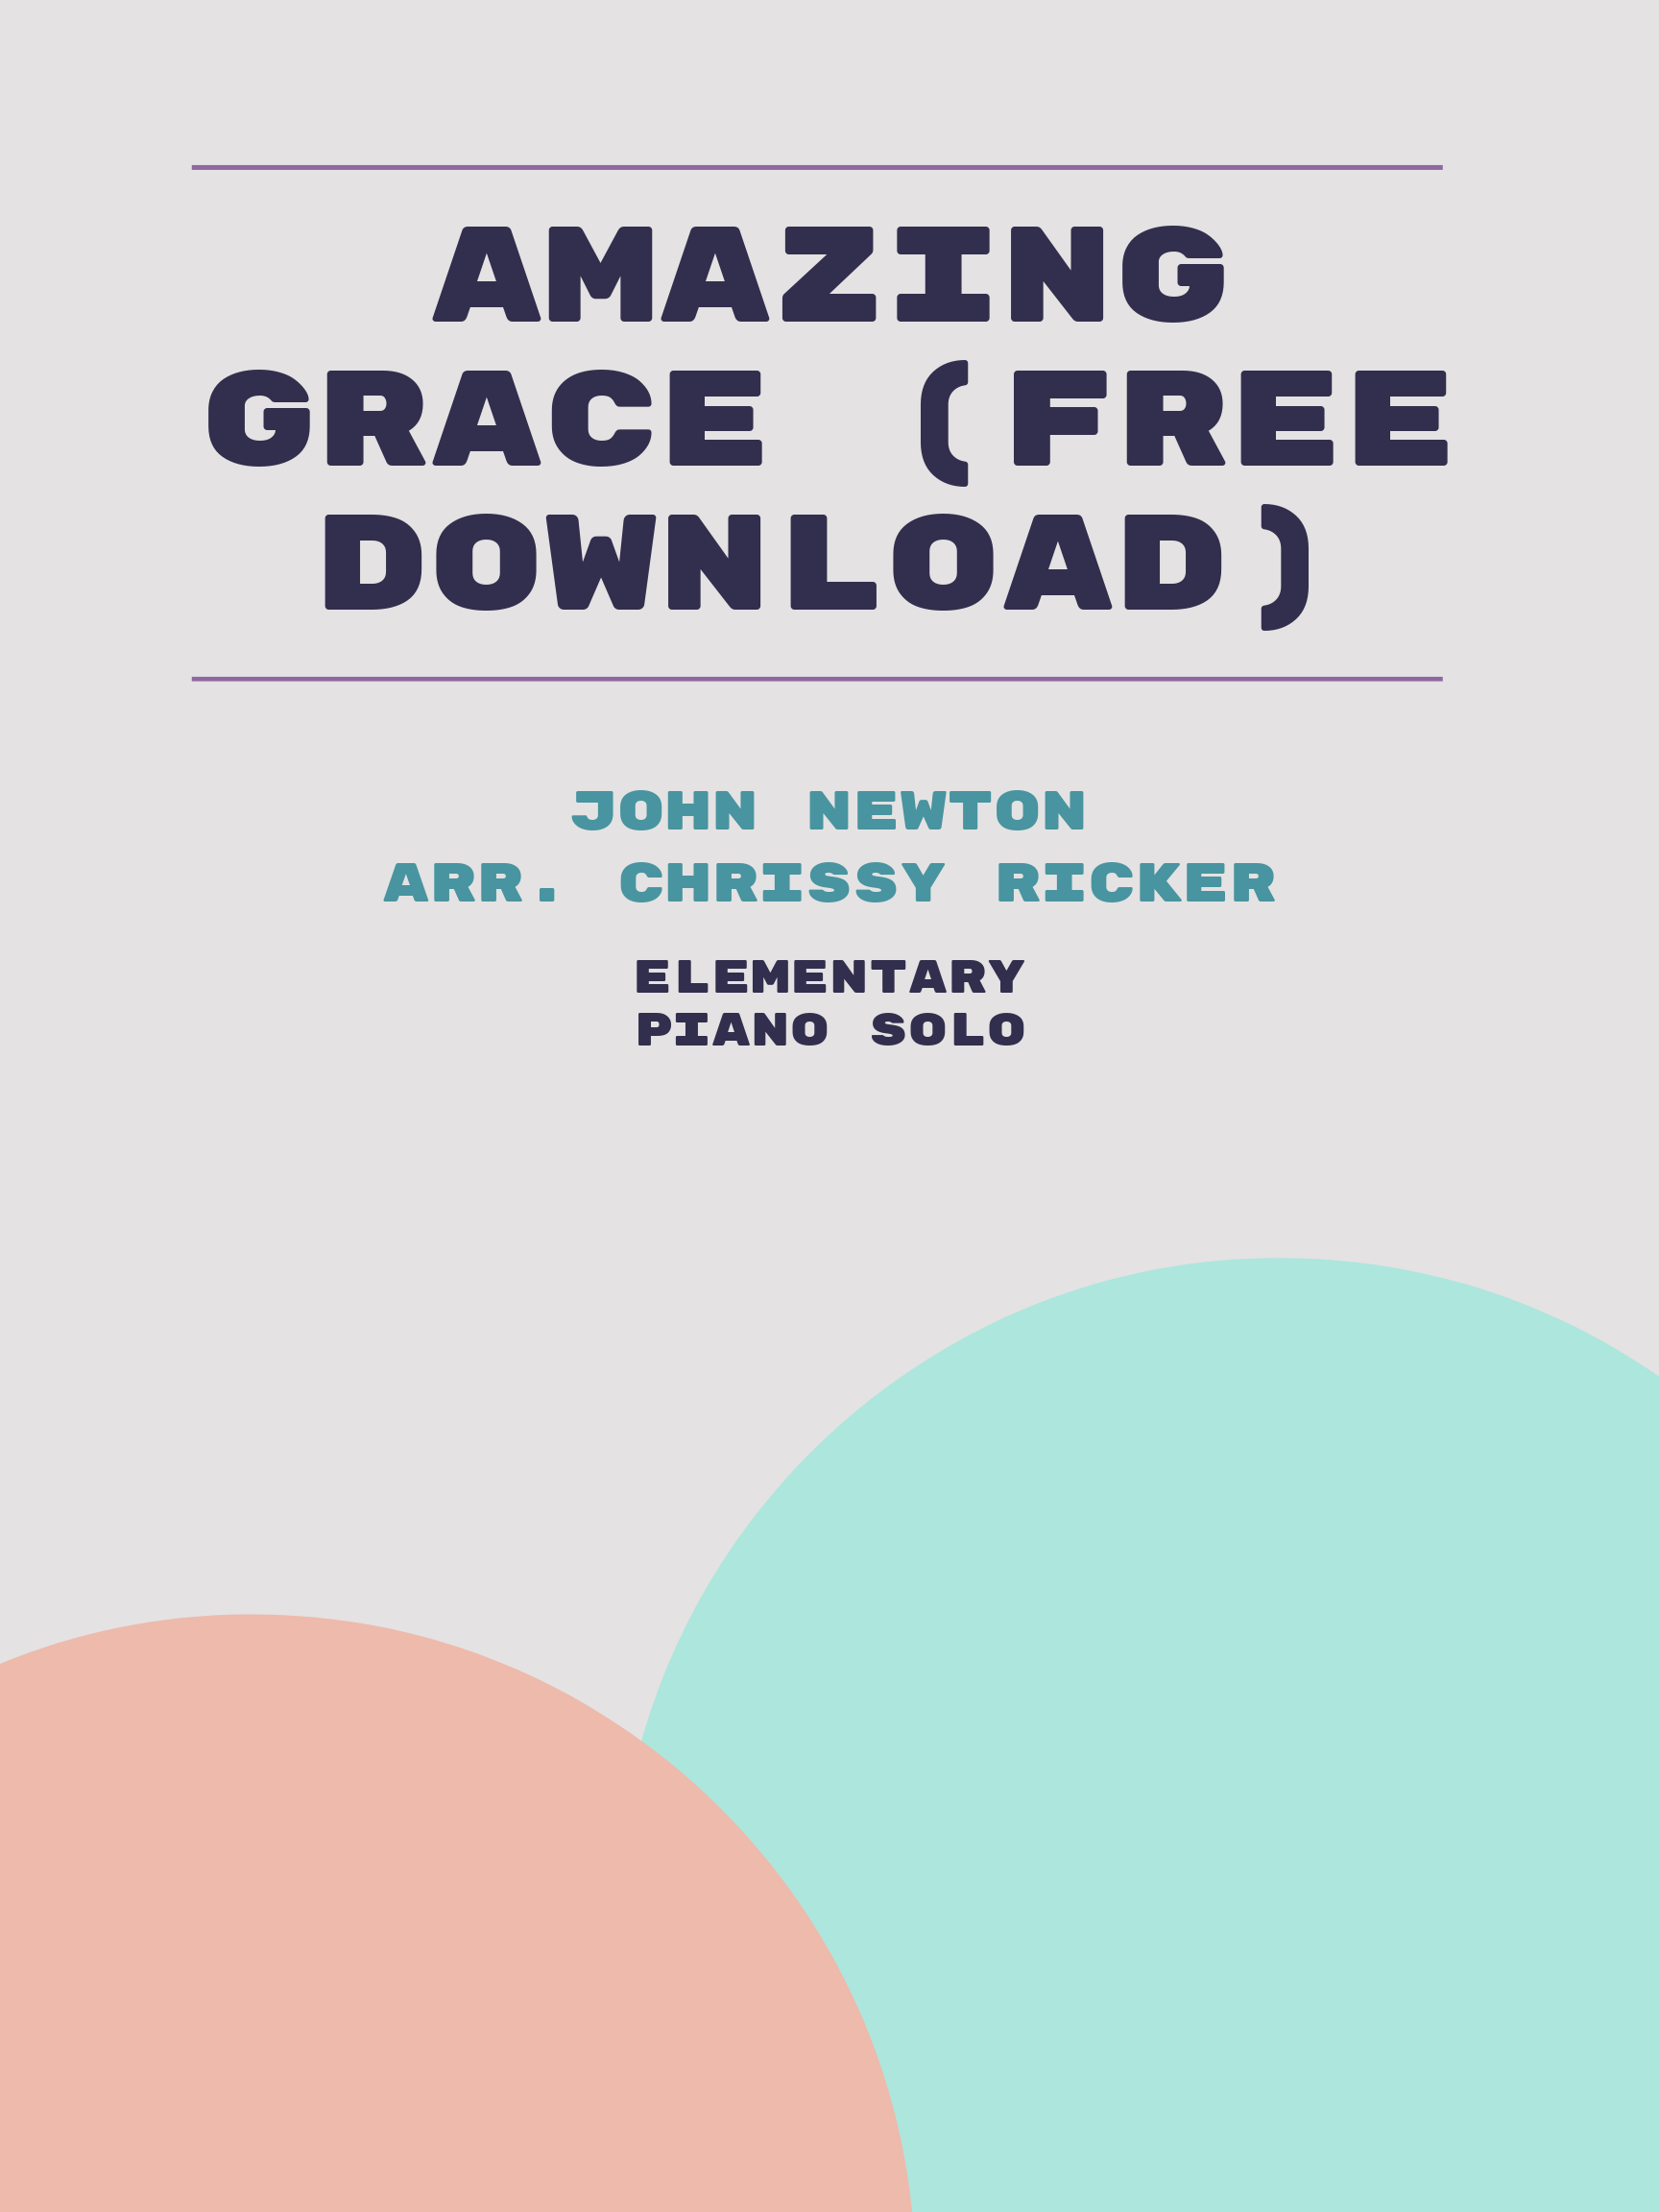 Amazing Grace (free download) Sample Page